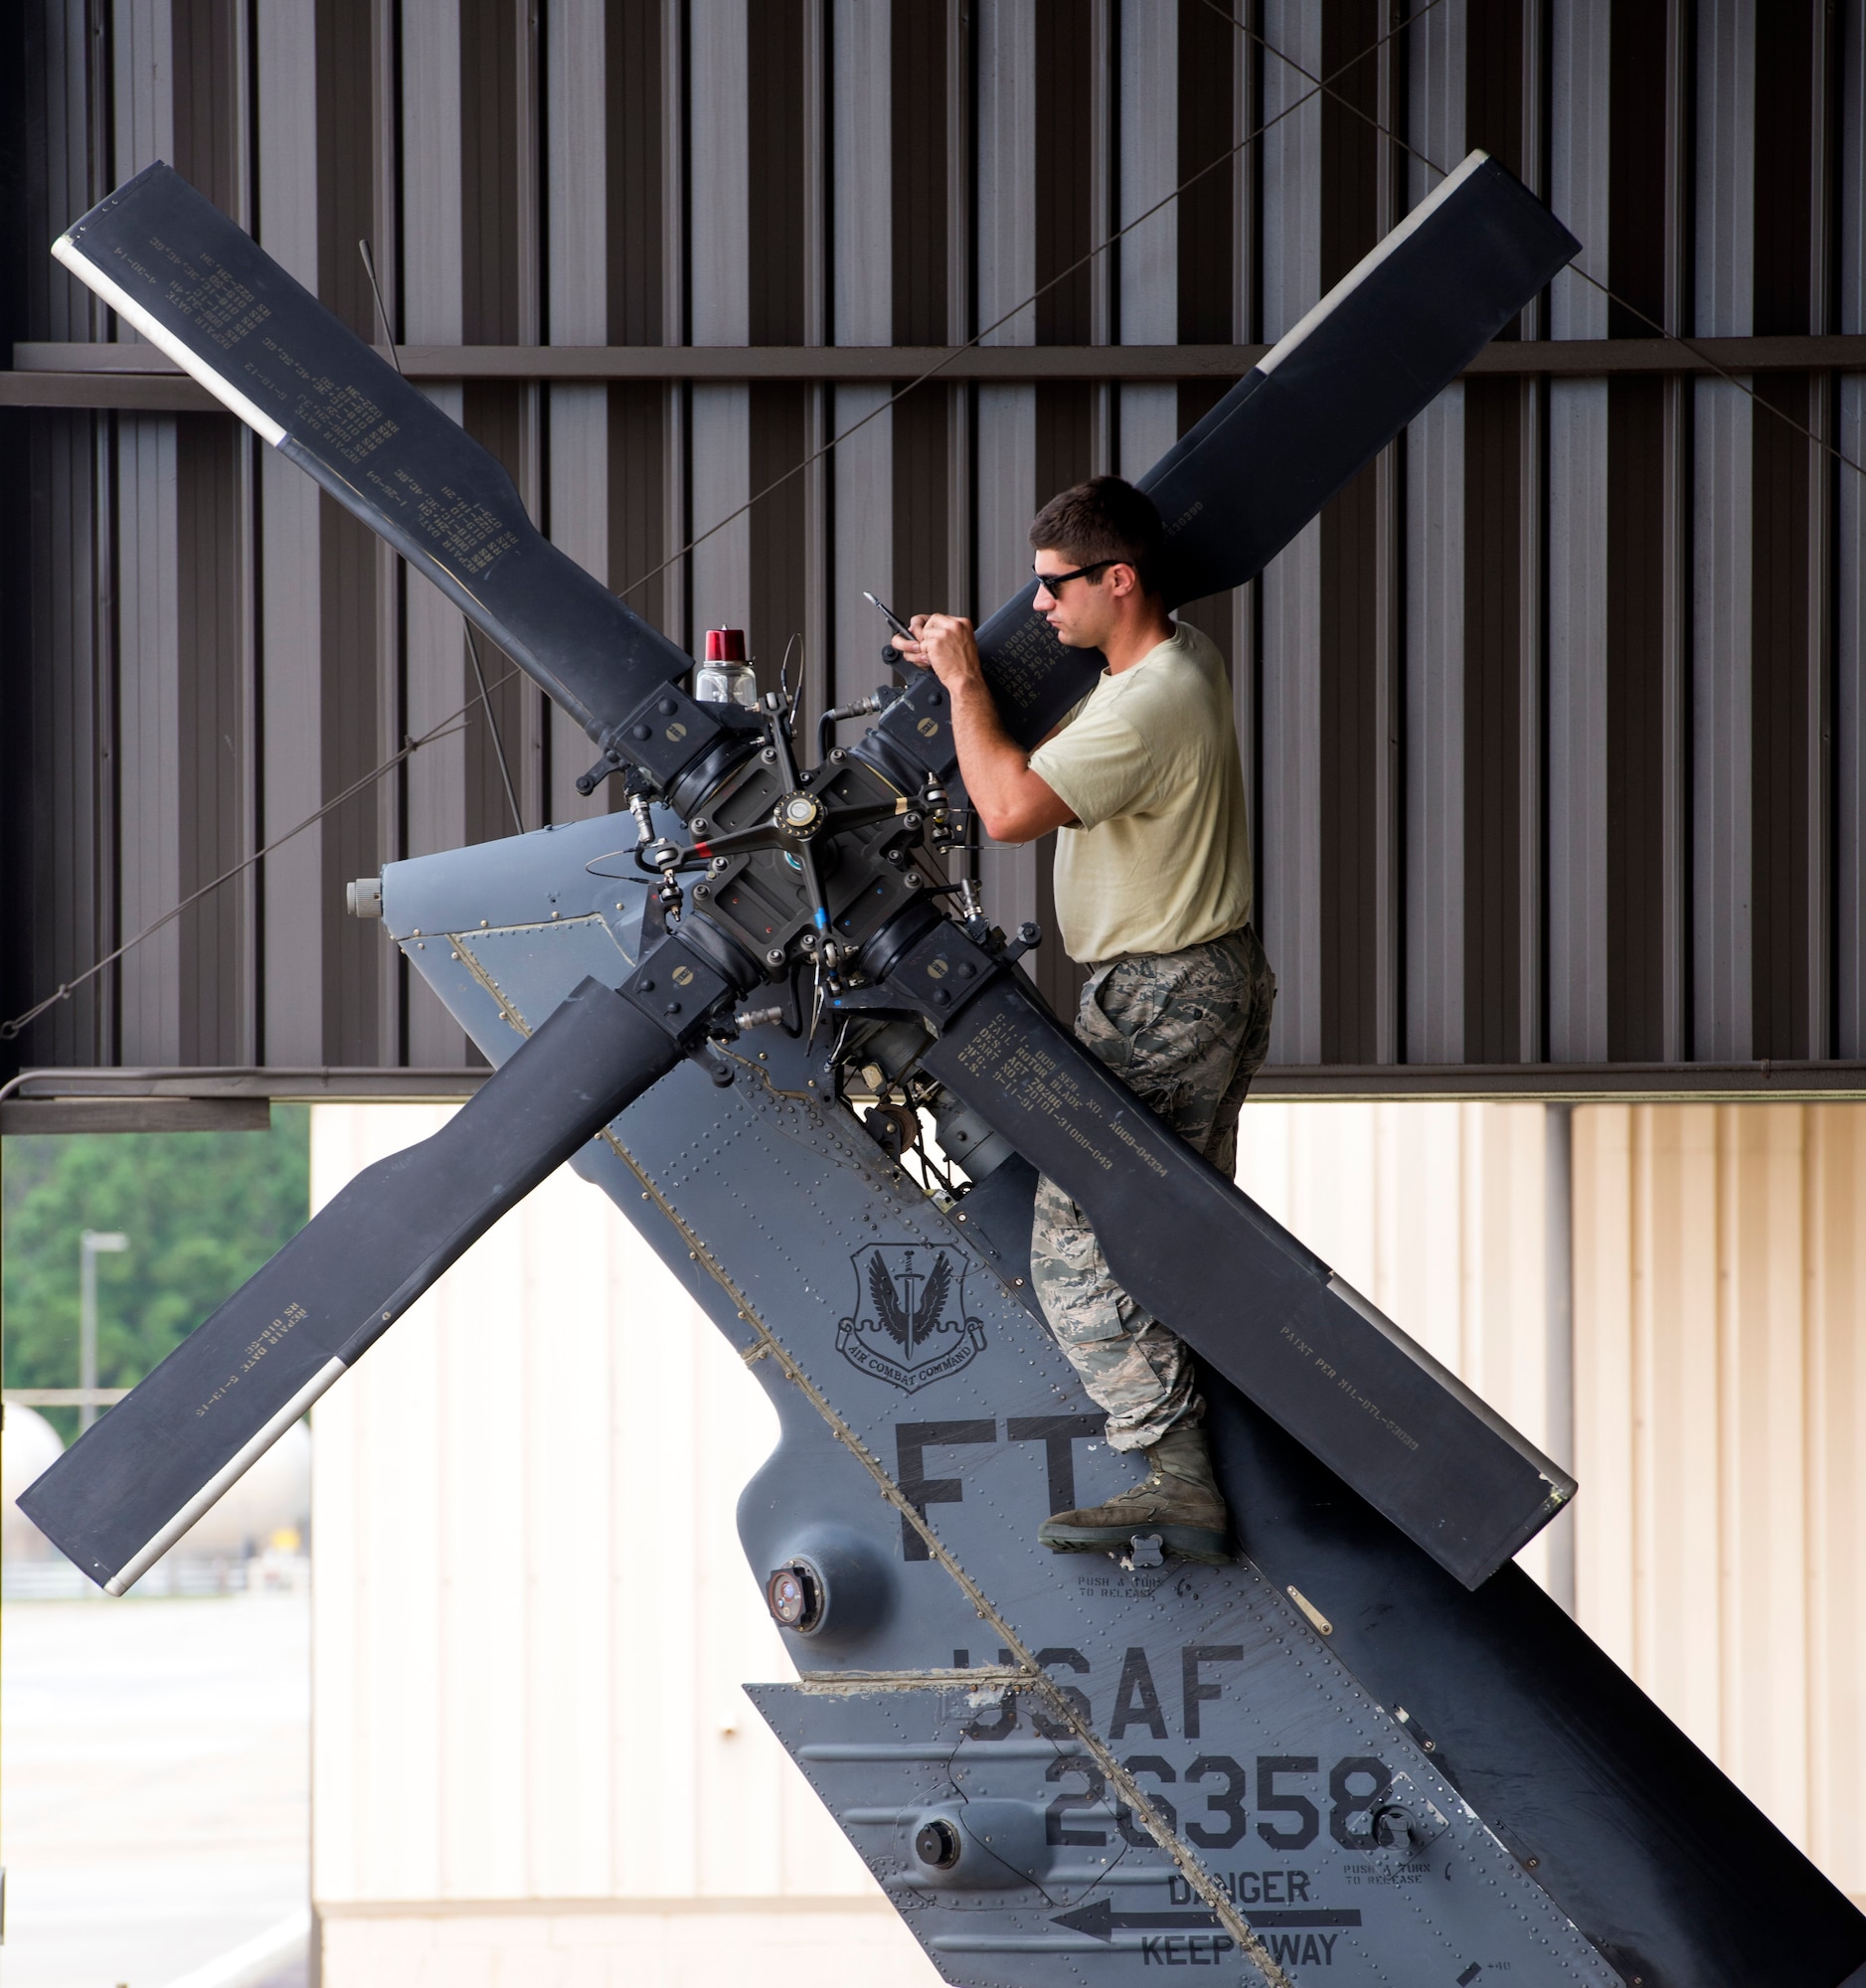 U.S. Air Force Senior Airman Anthony Staley, 41st Helicopter Maintenance Unit crew chief, cuts safety wire on the tail blade rotor of an HH-60G Pave Hawk, Aug. 10, 2016, at Moody Air Force Base, Ga. 41st HMU crew chiefs maintain, troubleshoot and inspect 13 HH-60’s in the 41st Rescue Squadron’s fleet. (U.S. Air Force photo by Airman 1st Class Greg Nash) 